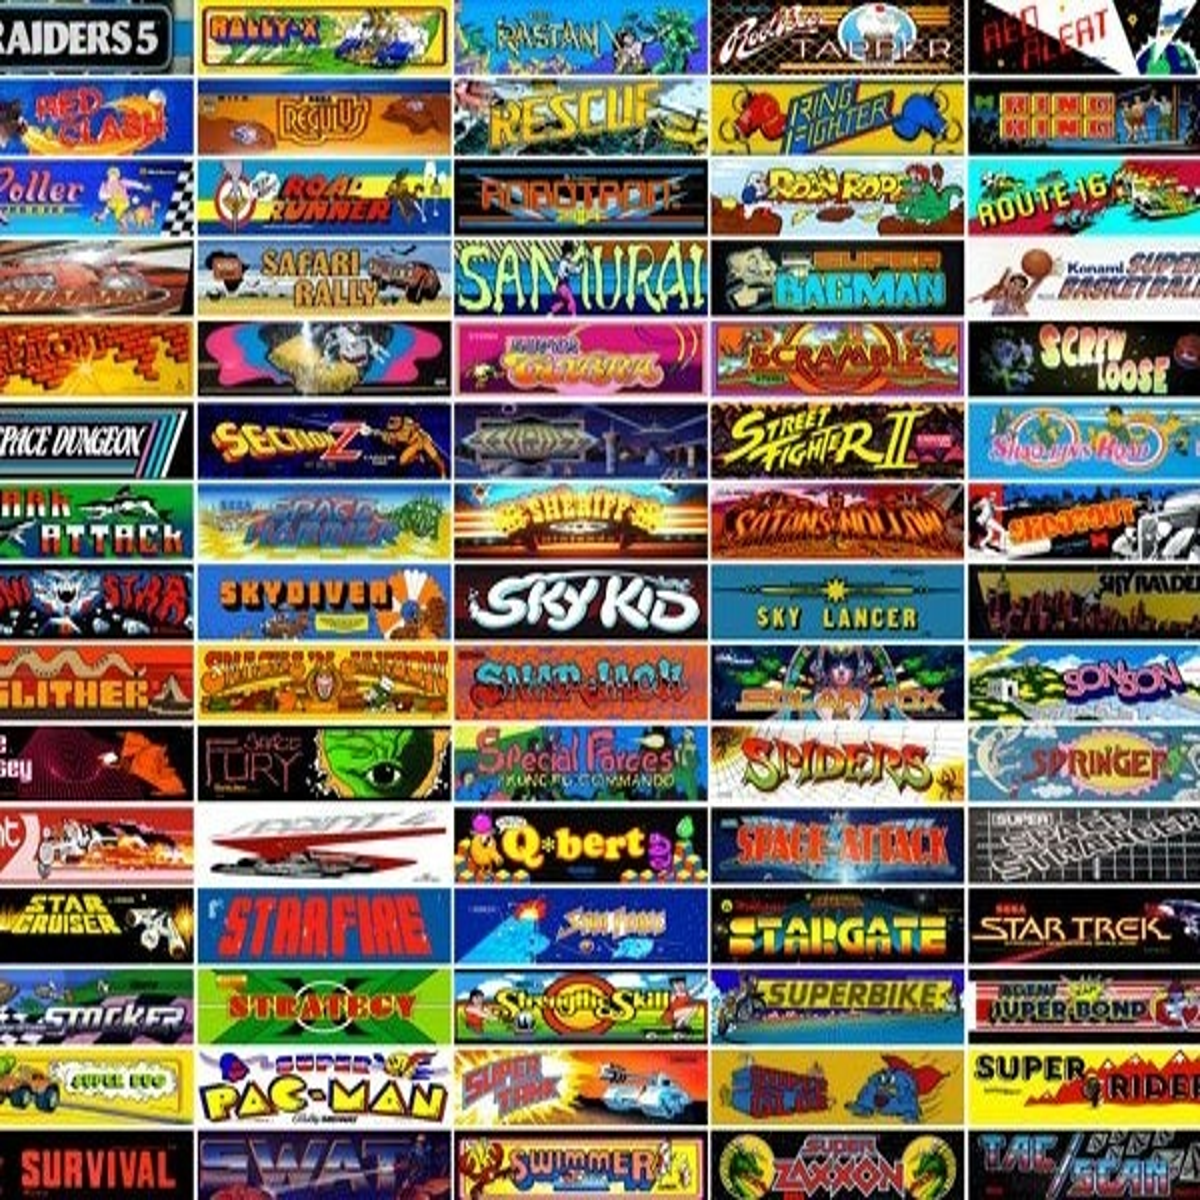 13 Classic Games You Can Play in Your Web Browser